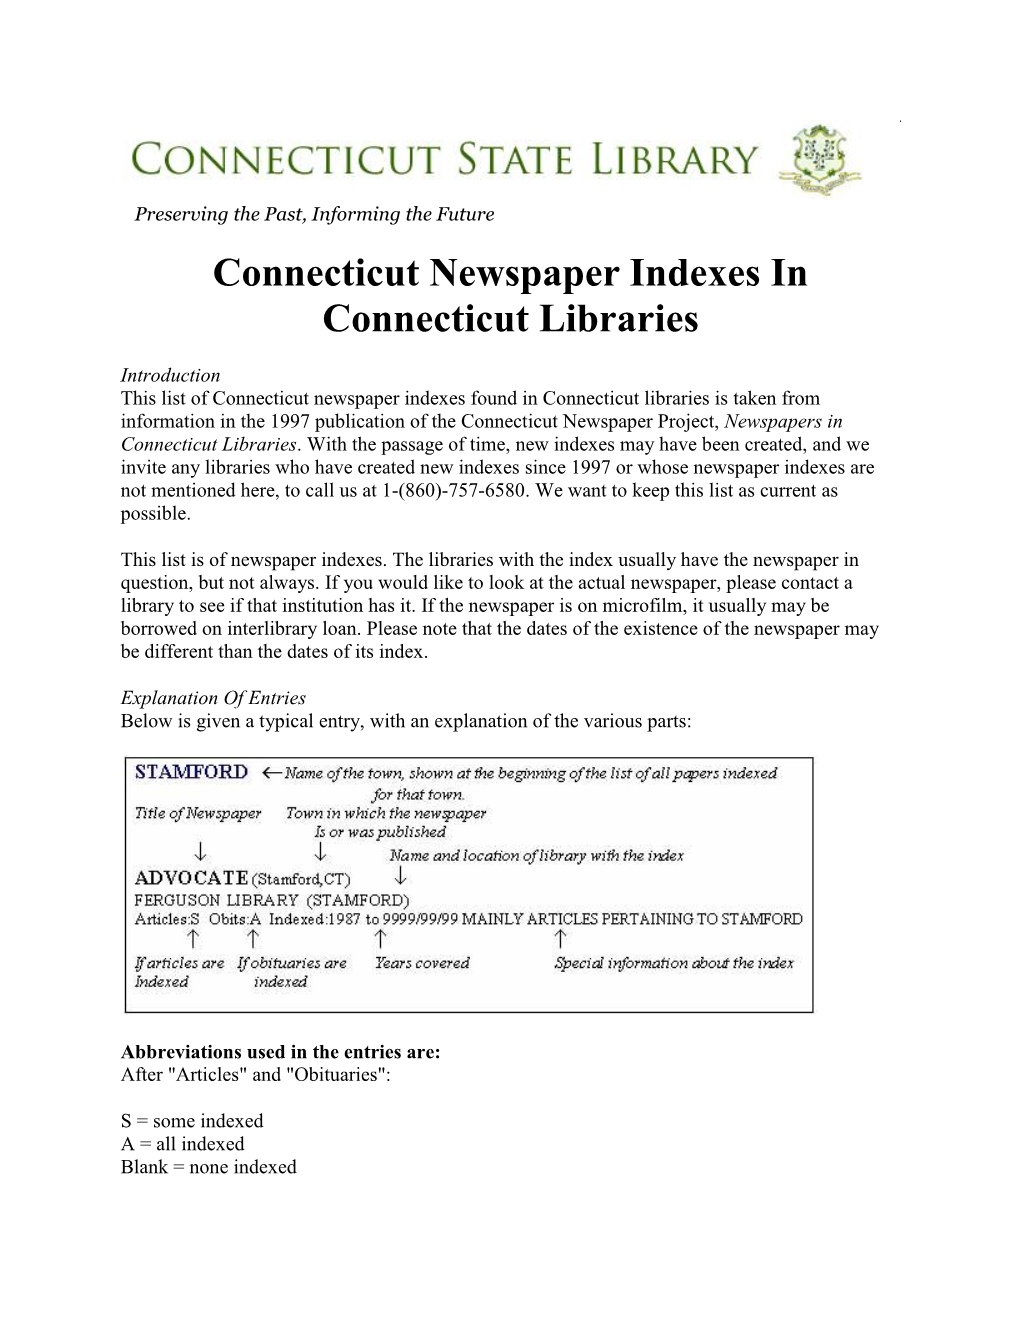 Connecticut Newspaper Indexes in Connecticut Libraries